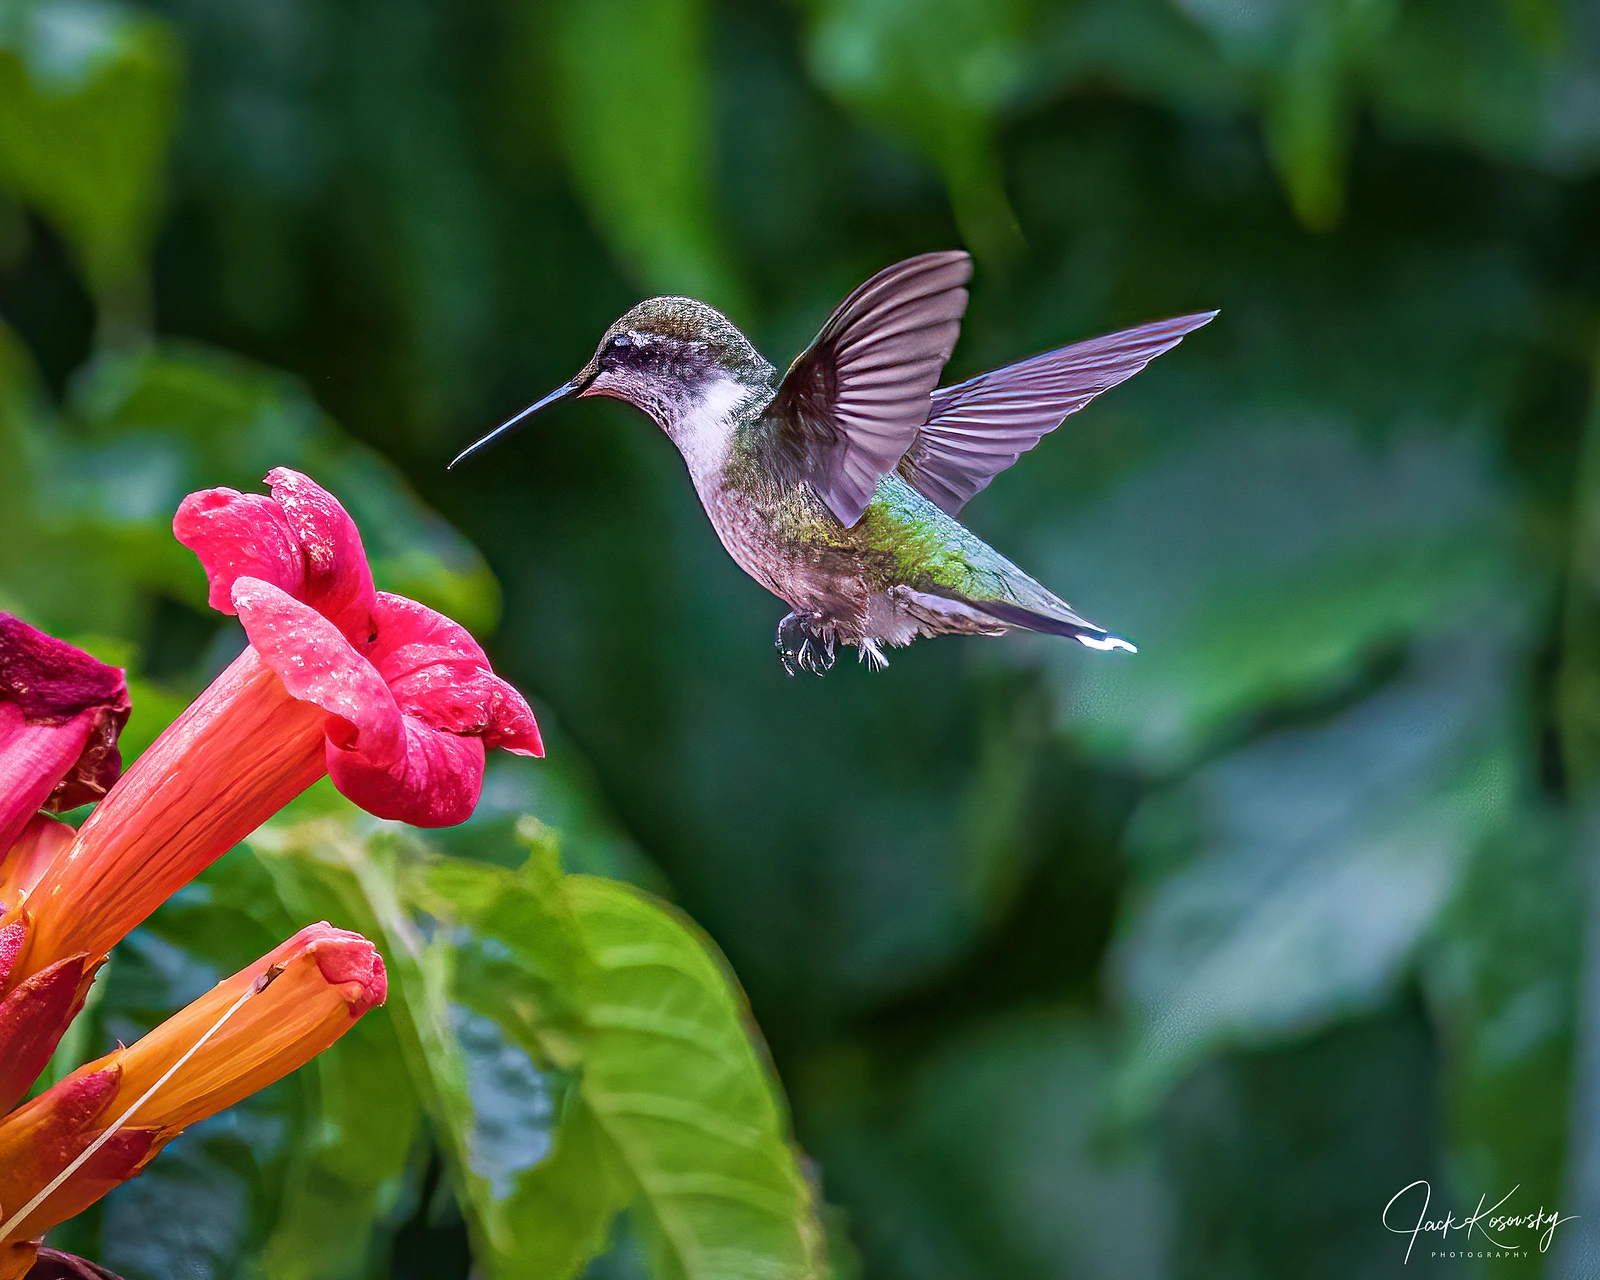 Photographing Humming Birds - Aug 10, 2021